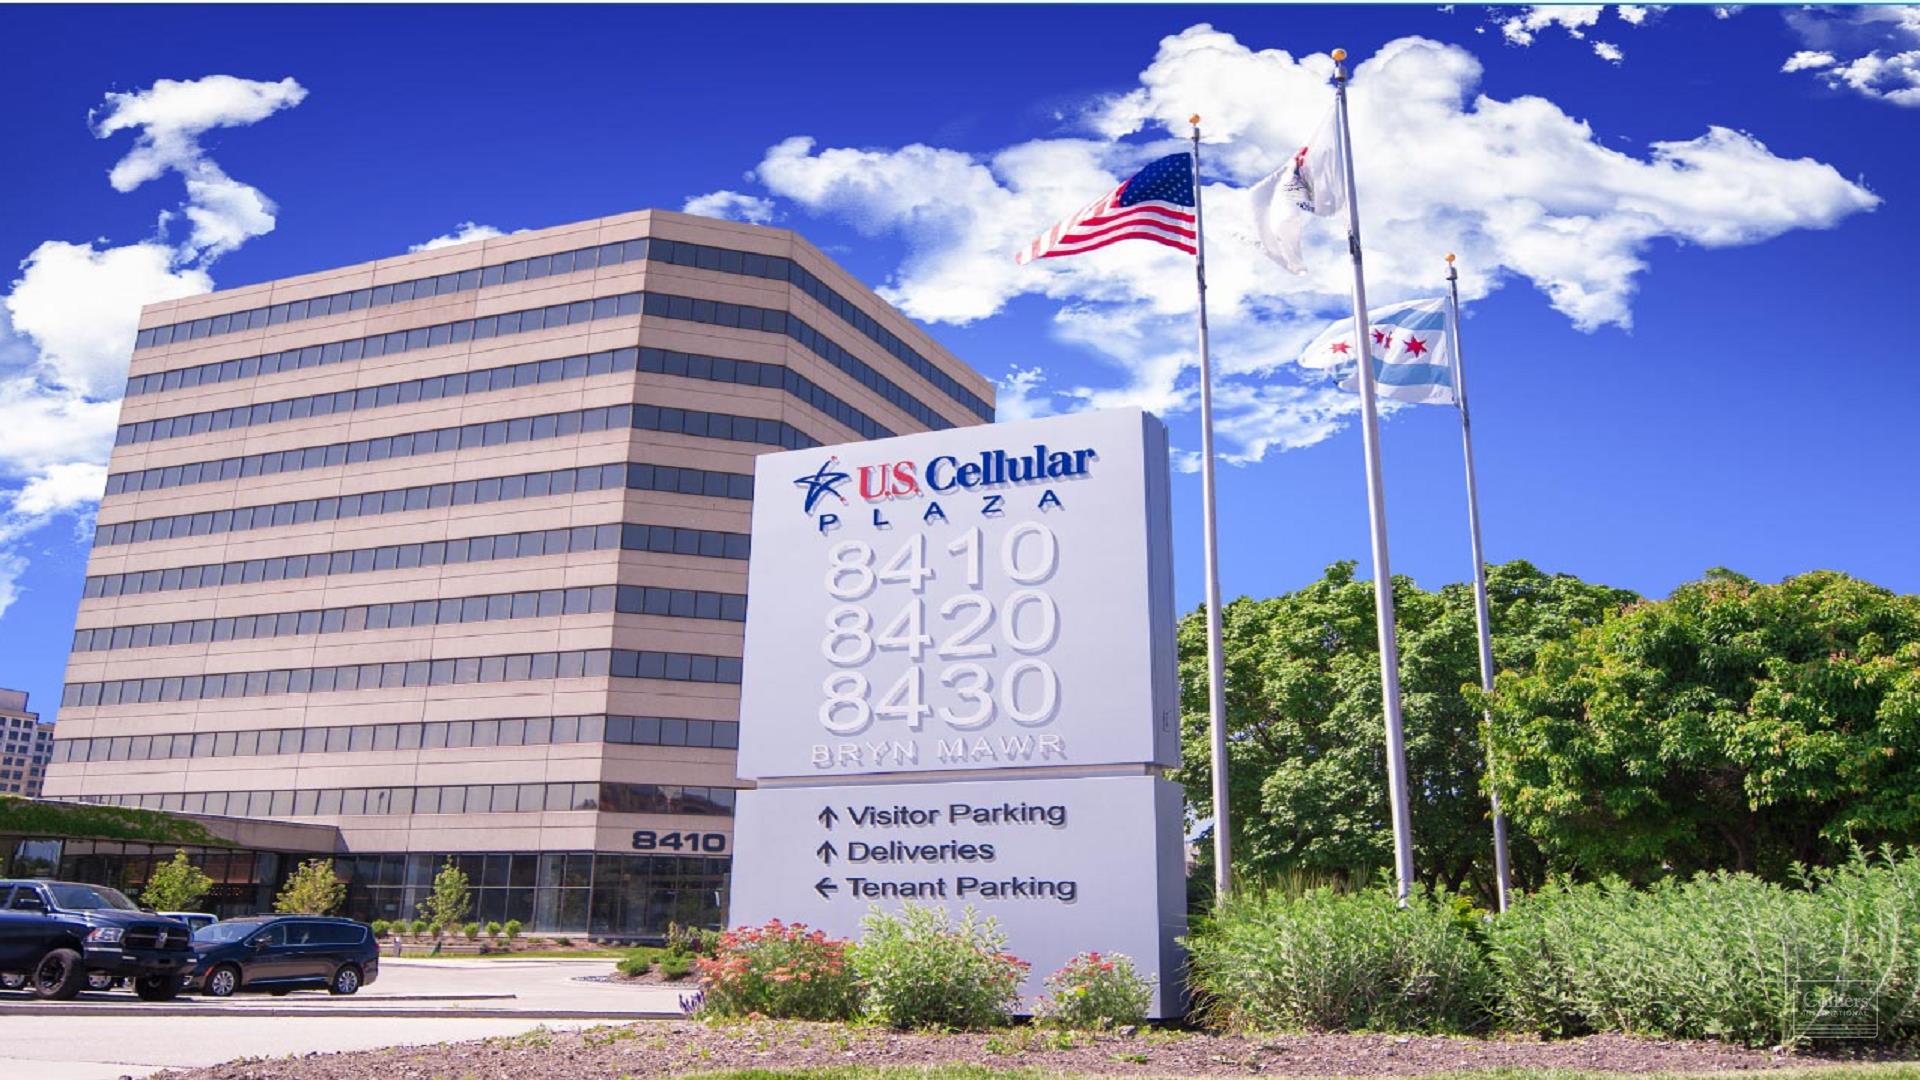 GSF USA bringst sustainable cleaning to U.S. Cellular Plaza